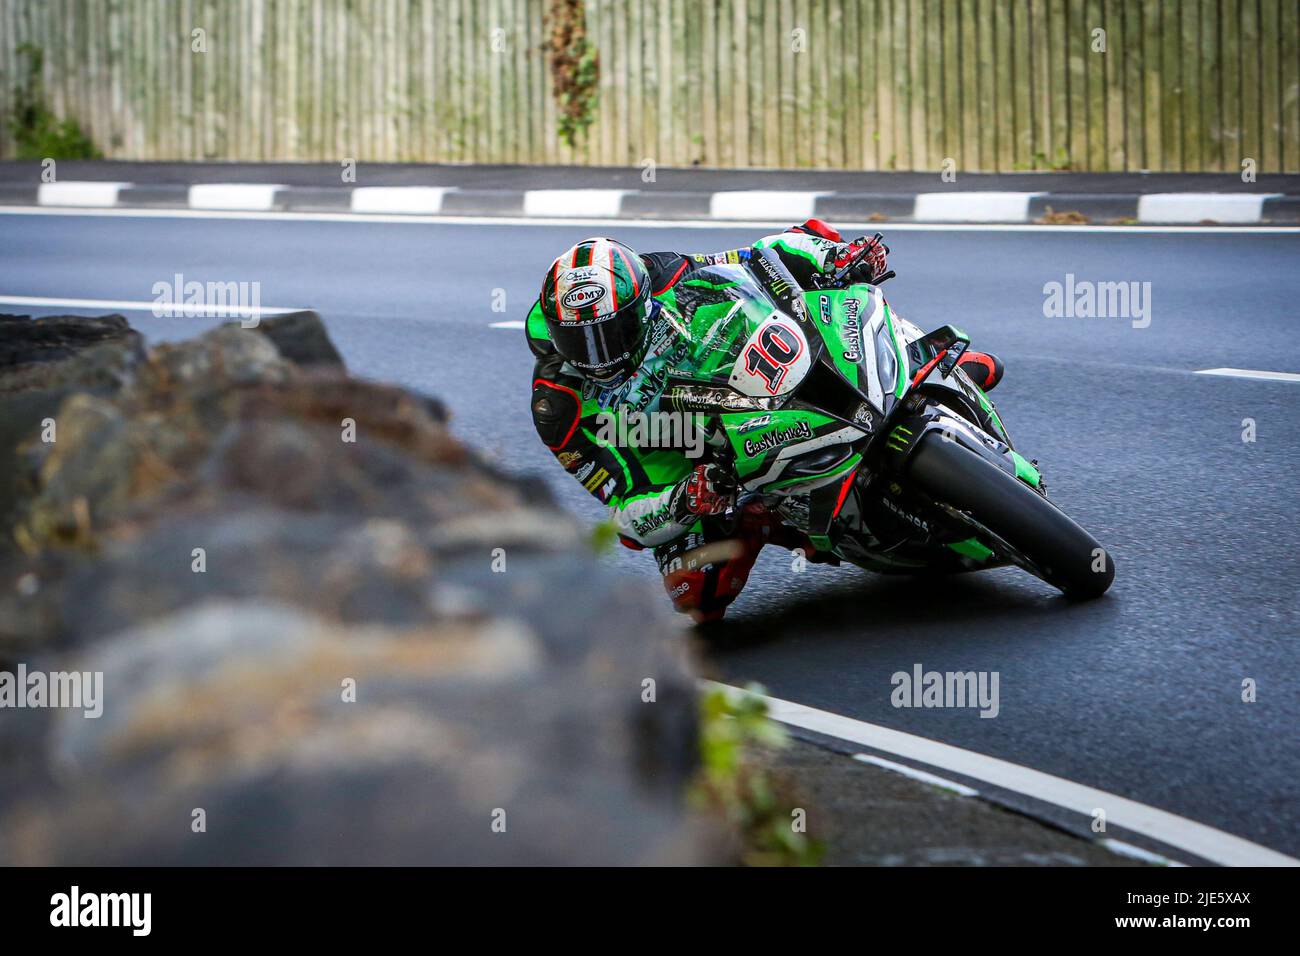 Peter Hickman on the Gas Monkey Garage by FHO Racing BMW S1000RR superbike at the 2022 Isle of Man TT races cornering next to a manx stone wall. Stock Photo